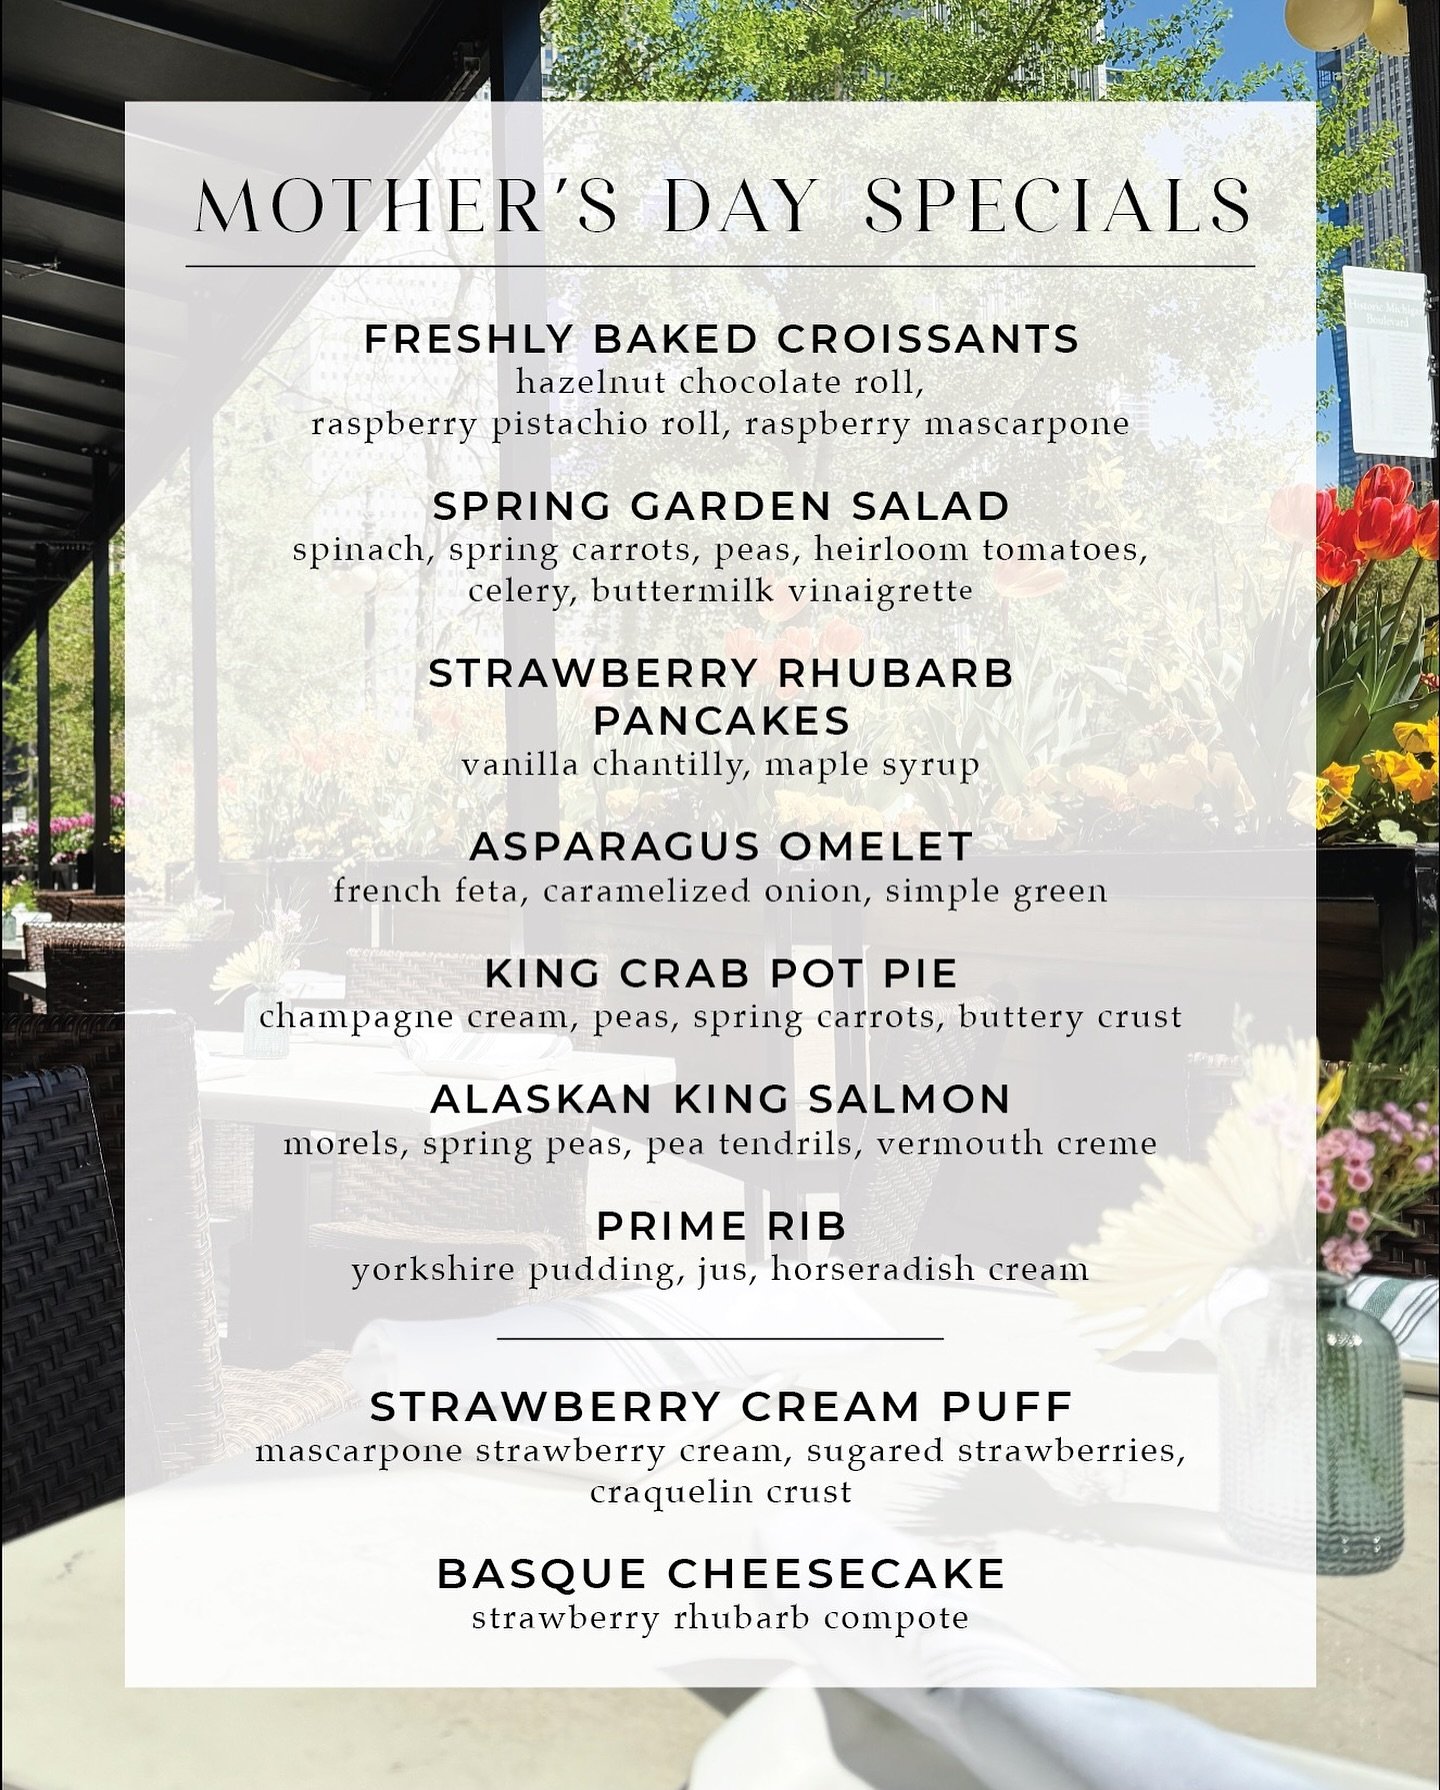 Make Mom&rsquo;s day at The Gage this Mother&rsquo;s Day 🌷 Featuring celebratory brunch and dinner specials alongside our regular menus ⁠
⁠
Limited spots available &ndash; reserve your table at the thegagechicago.com